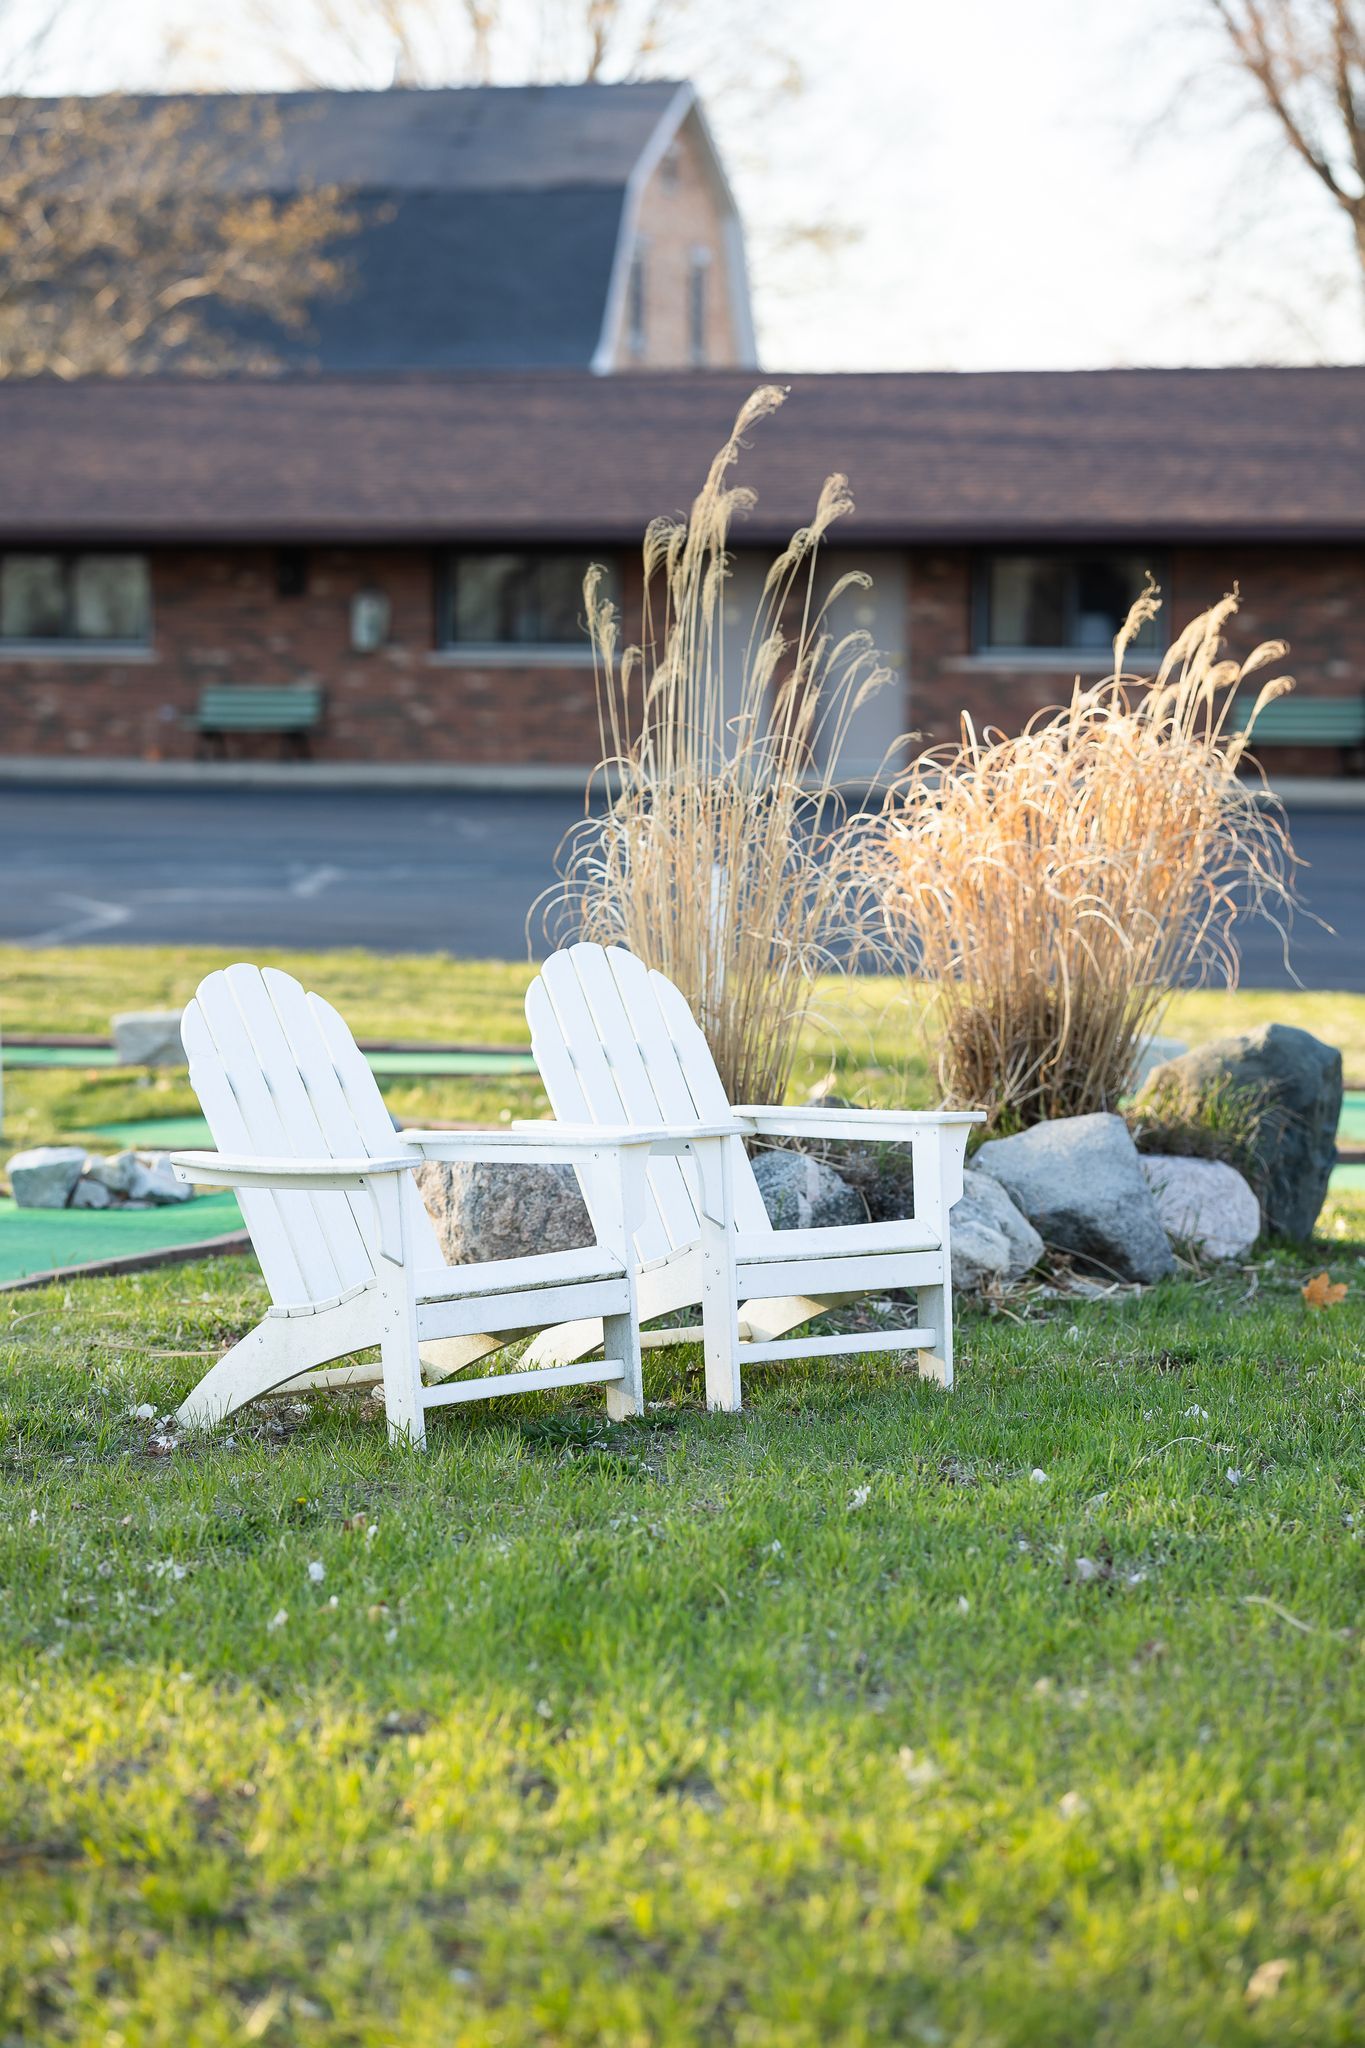 Two white Adirondack chairs sit in the grass in front of a house.